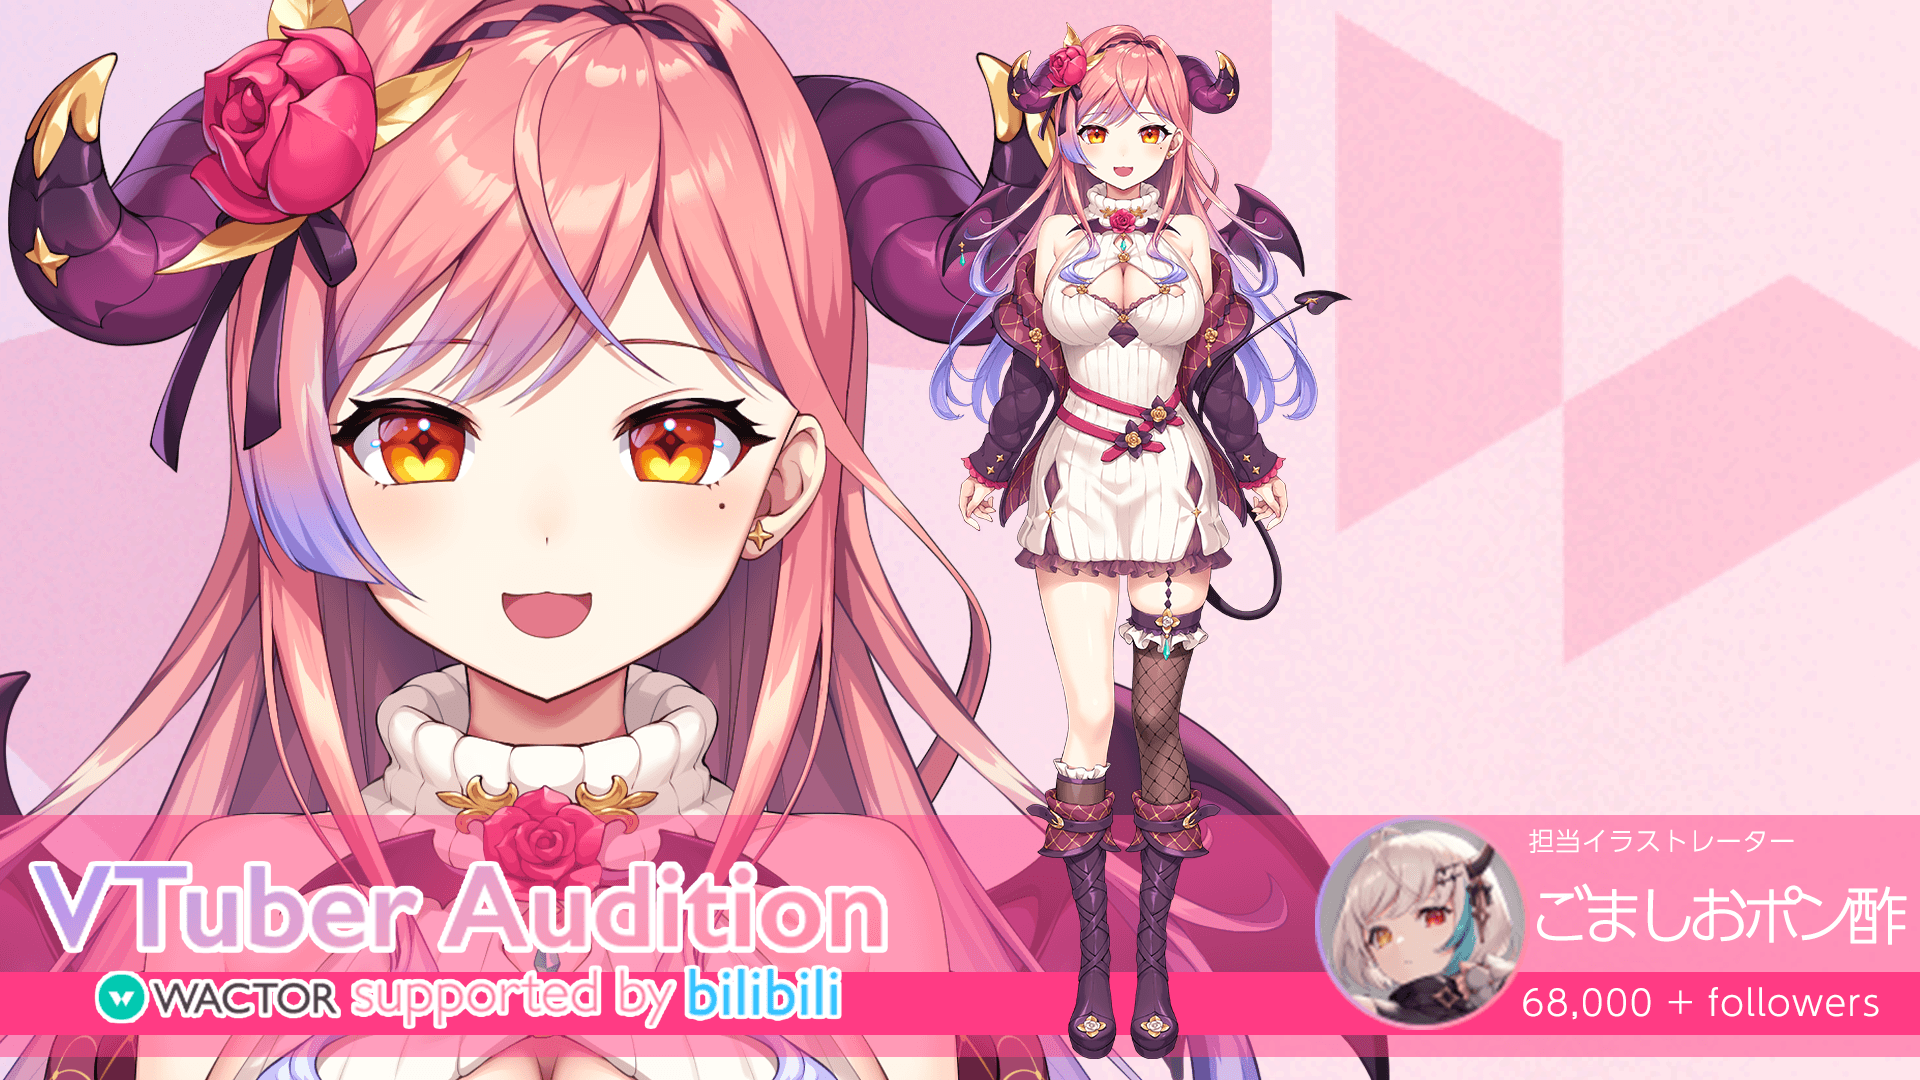 wactor-vtuber-audition-supported-by-bilibili-4-2